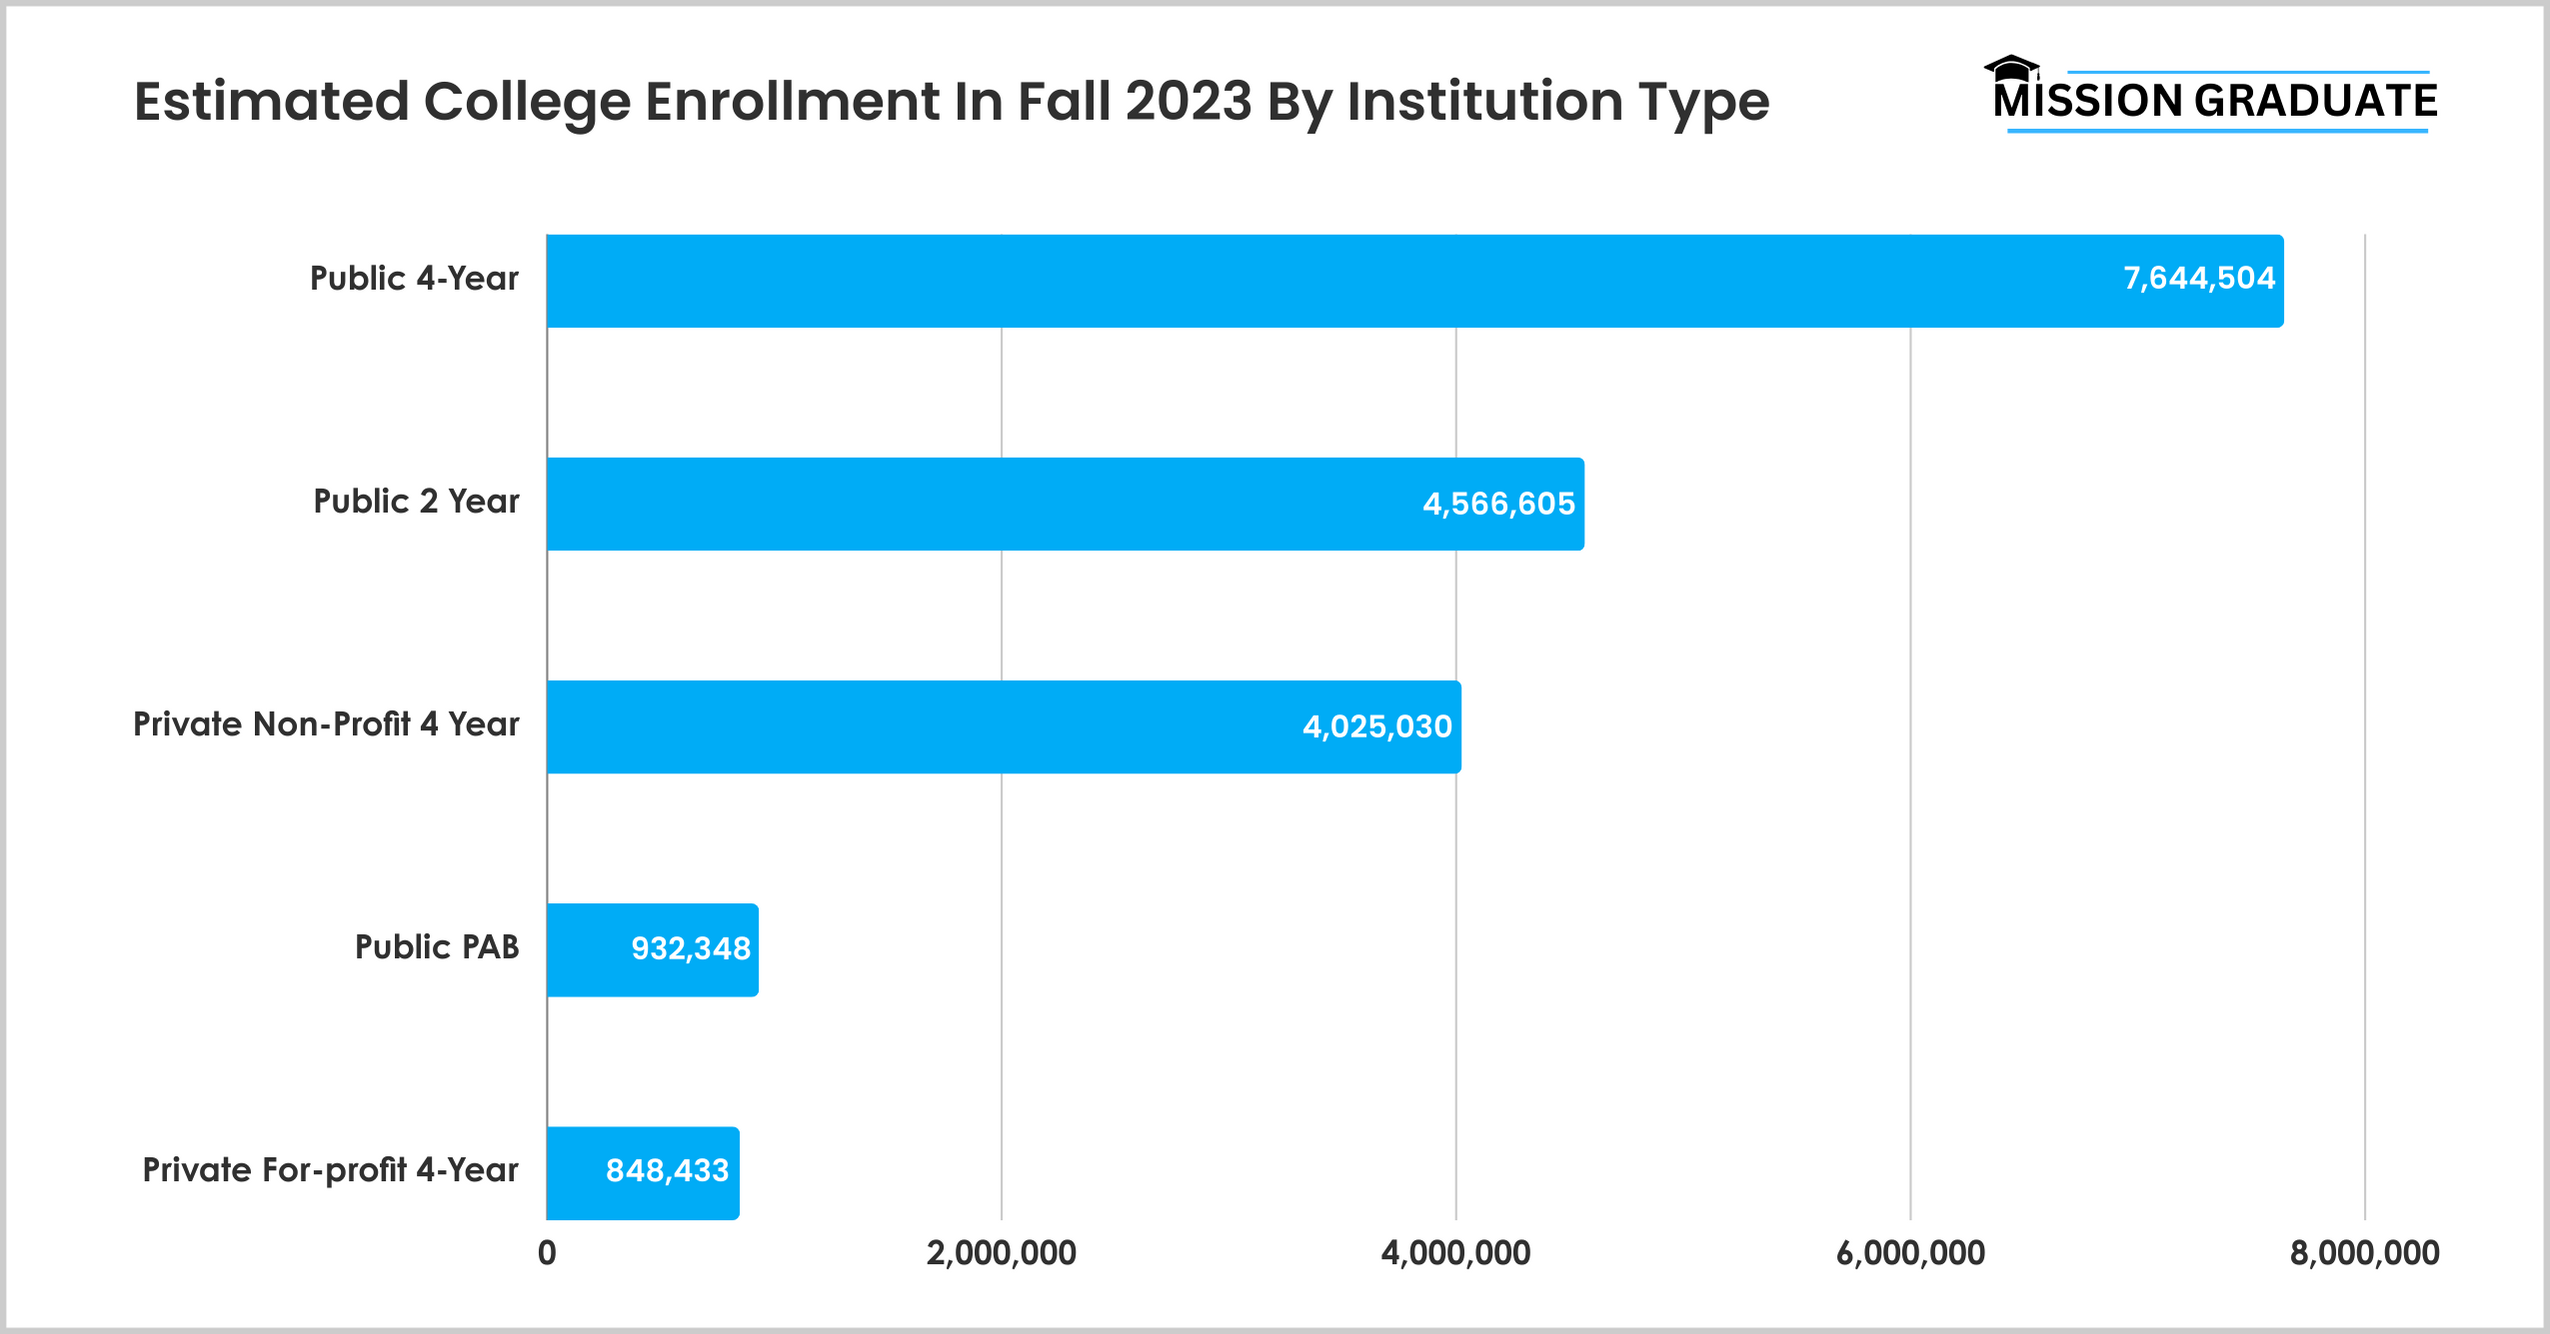 Estimated College Enrollment In Fall 2023 By Institution Type